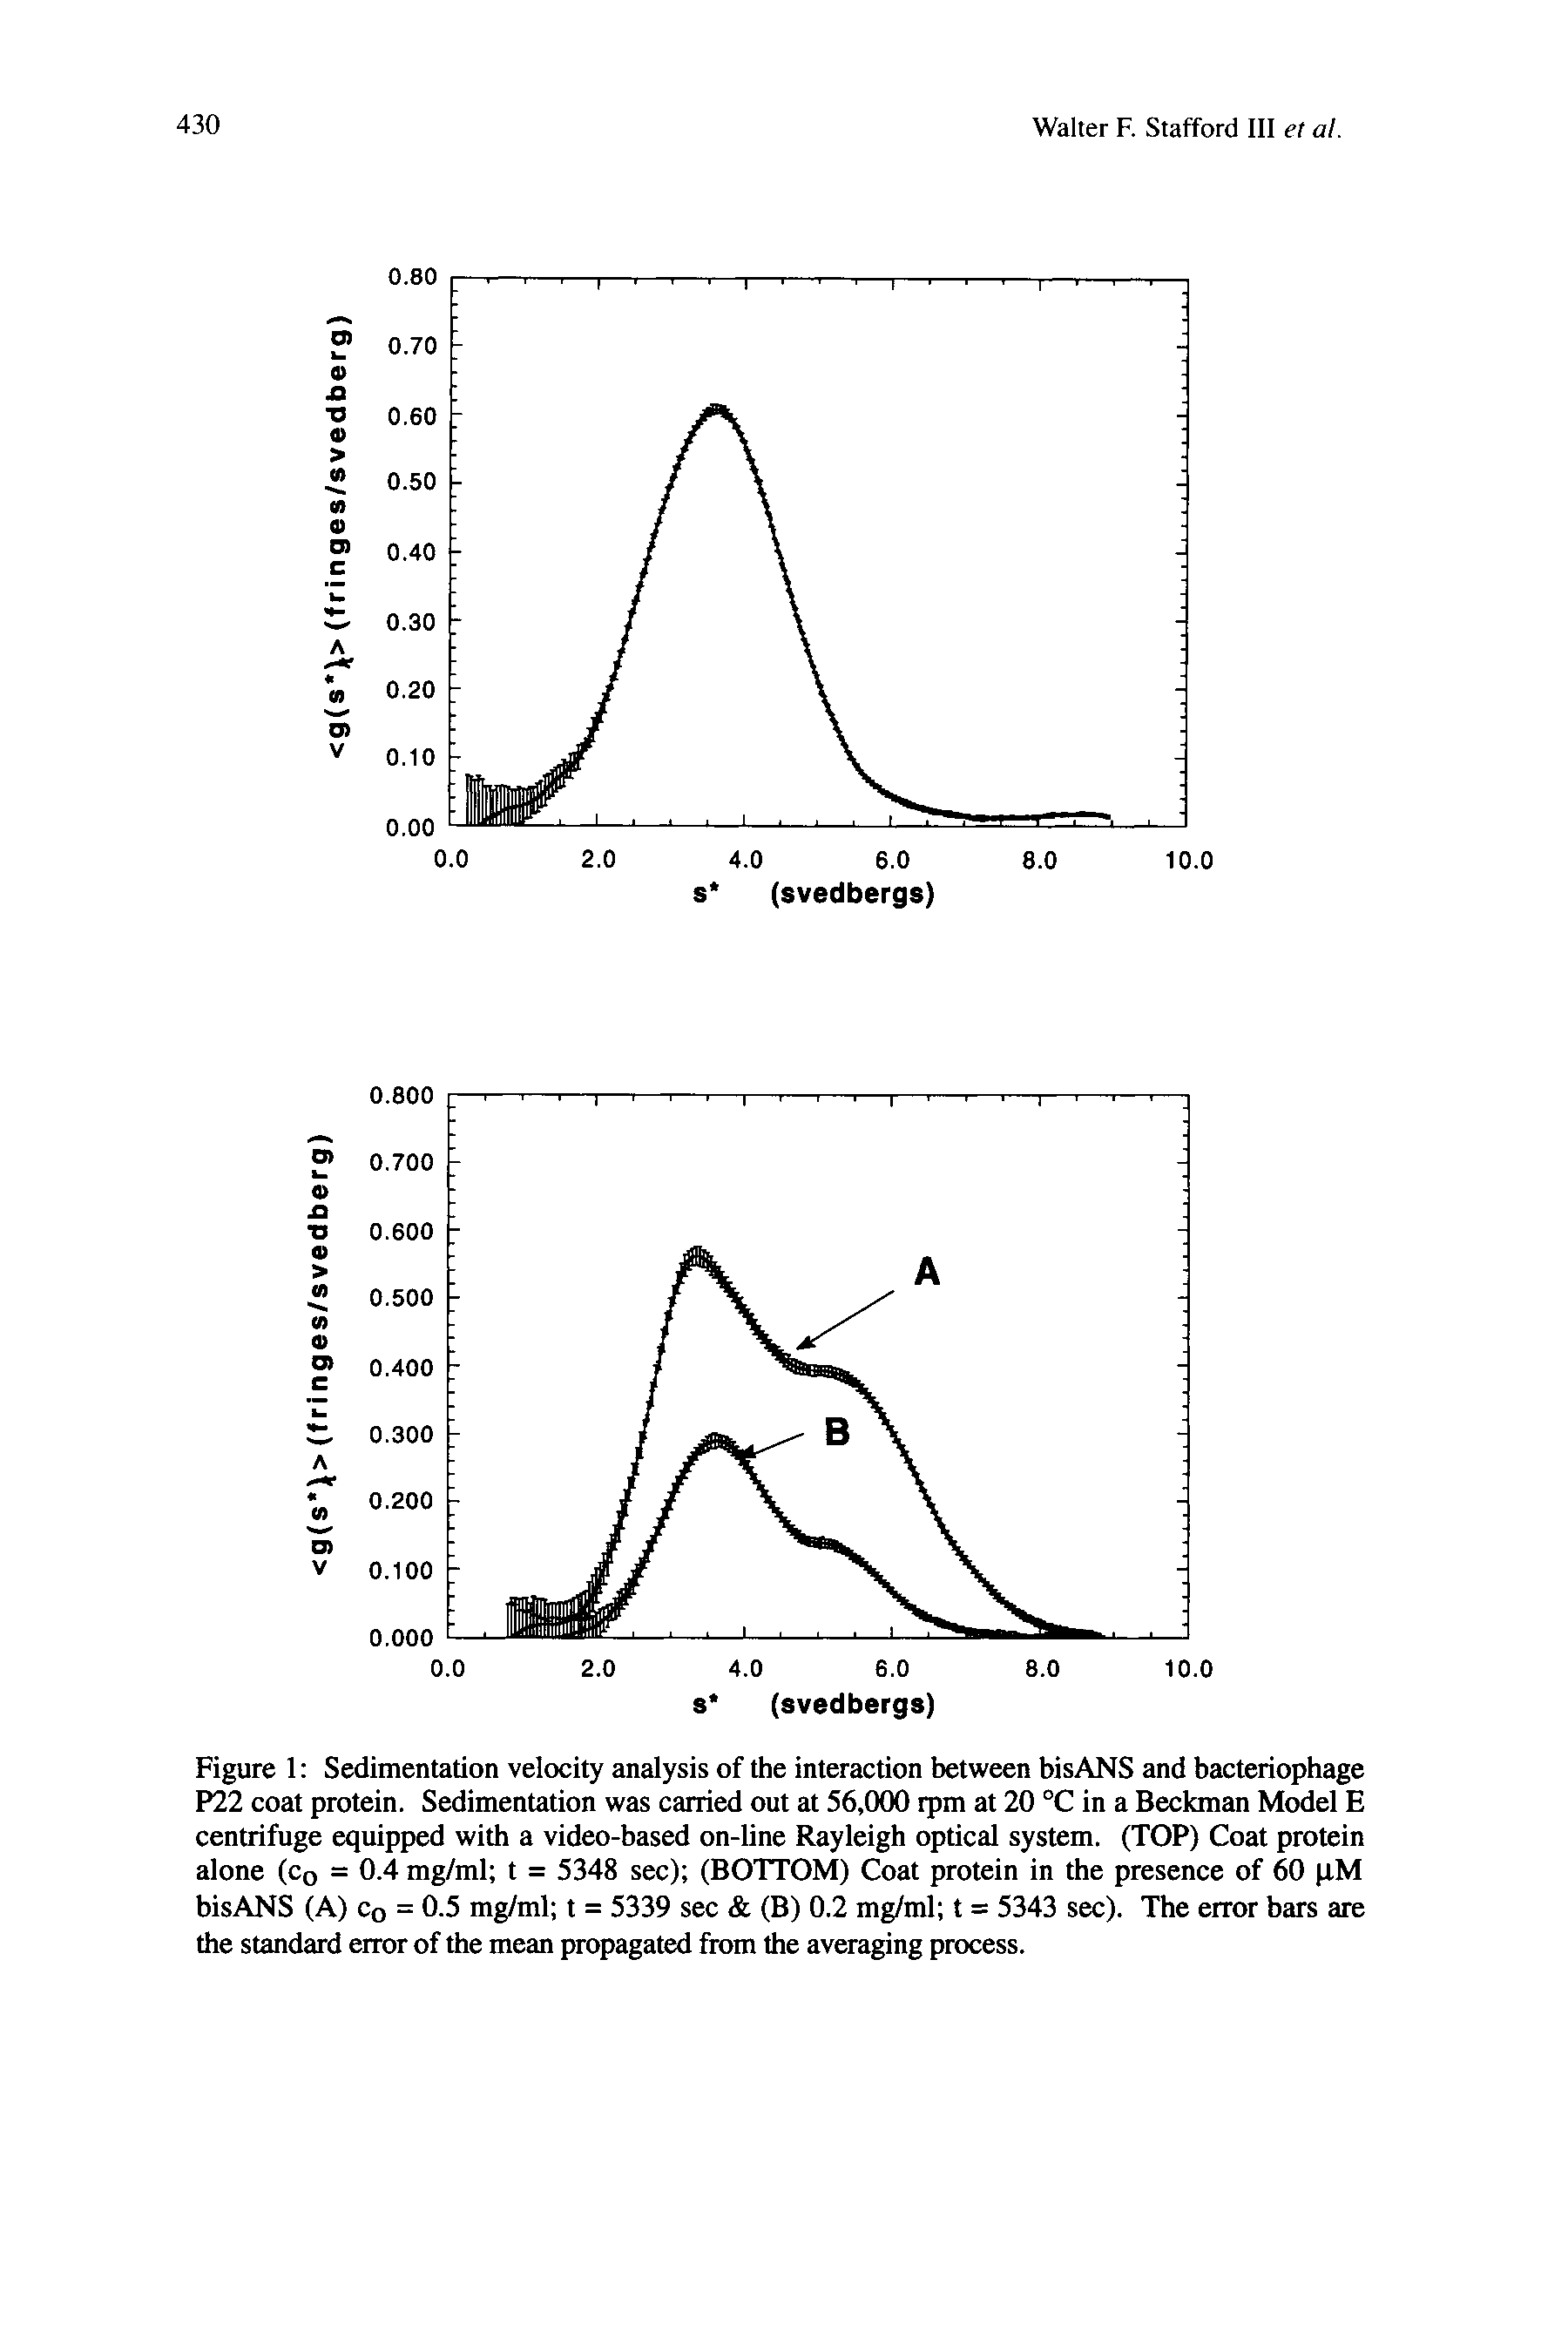 Figure 1 Sedimentation velocity analysis of the interaction between bisANS and bacteriophage P22 coat protein. Sedimentation was carried out at 56,0(X) rpm at 20 °C in a Beckman Model E centrifuge equipped with a video-based on-line Rayleigh optical system. (TOP) Coat protein alone (cq = 0.4 mg/ml t = 5348 sec) (BOTTOM) Coat protein in the presence of 60 (iM bisANS (A) Co = 0.5 mg/ml t = 5339 sec (B) 0.2 mg/ml t = 5343 sec). The error bars are the standard error of the mean propagated from the averaging process.